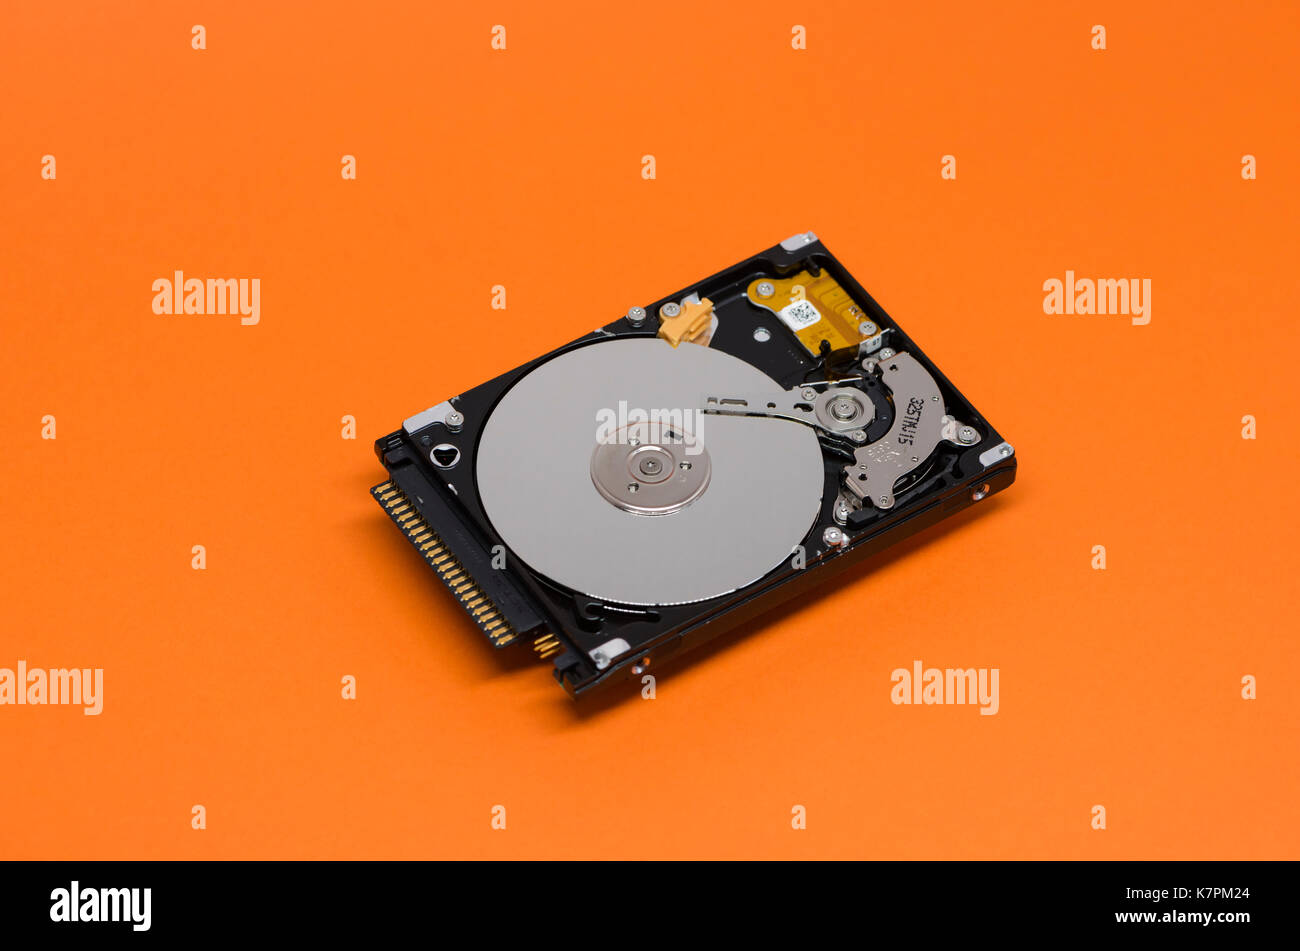 Close-up of an opened computer hard drive disk on orange colored background. Stock Photo